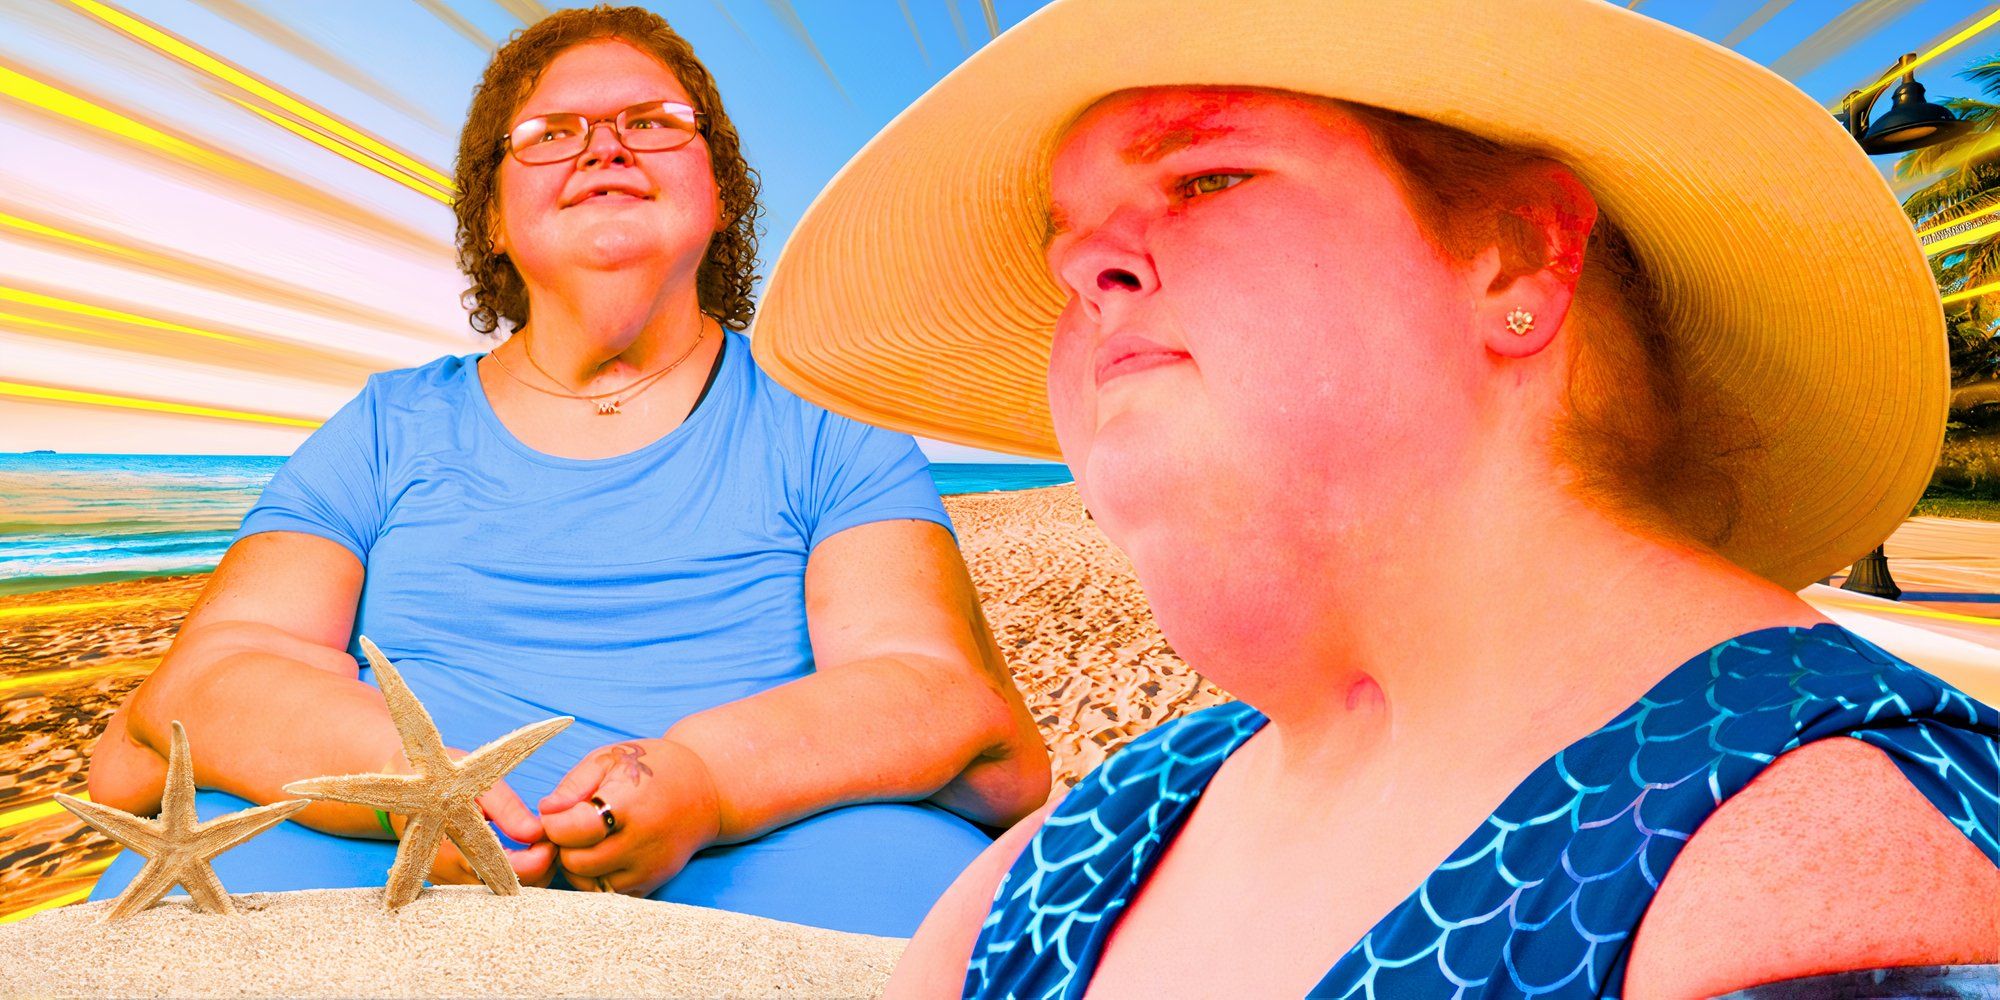 1000 lb sisters star tammy slaton in beach montage featuring tammy in sunhat and blue top with starfish